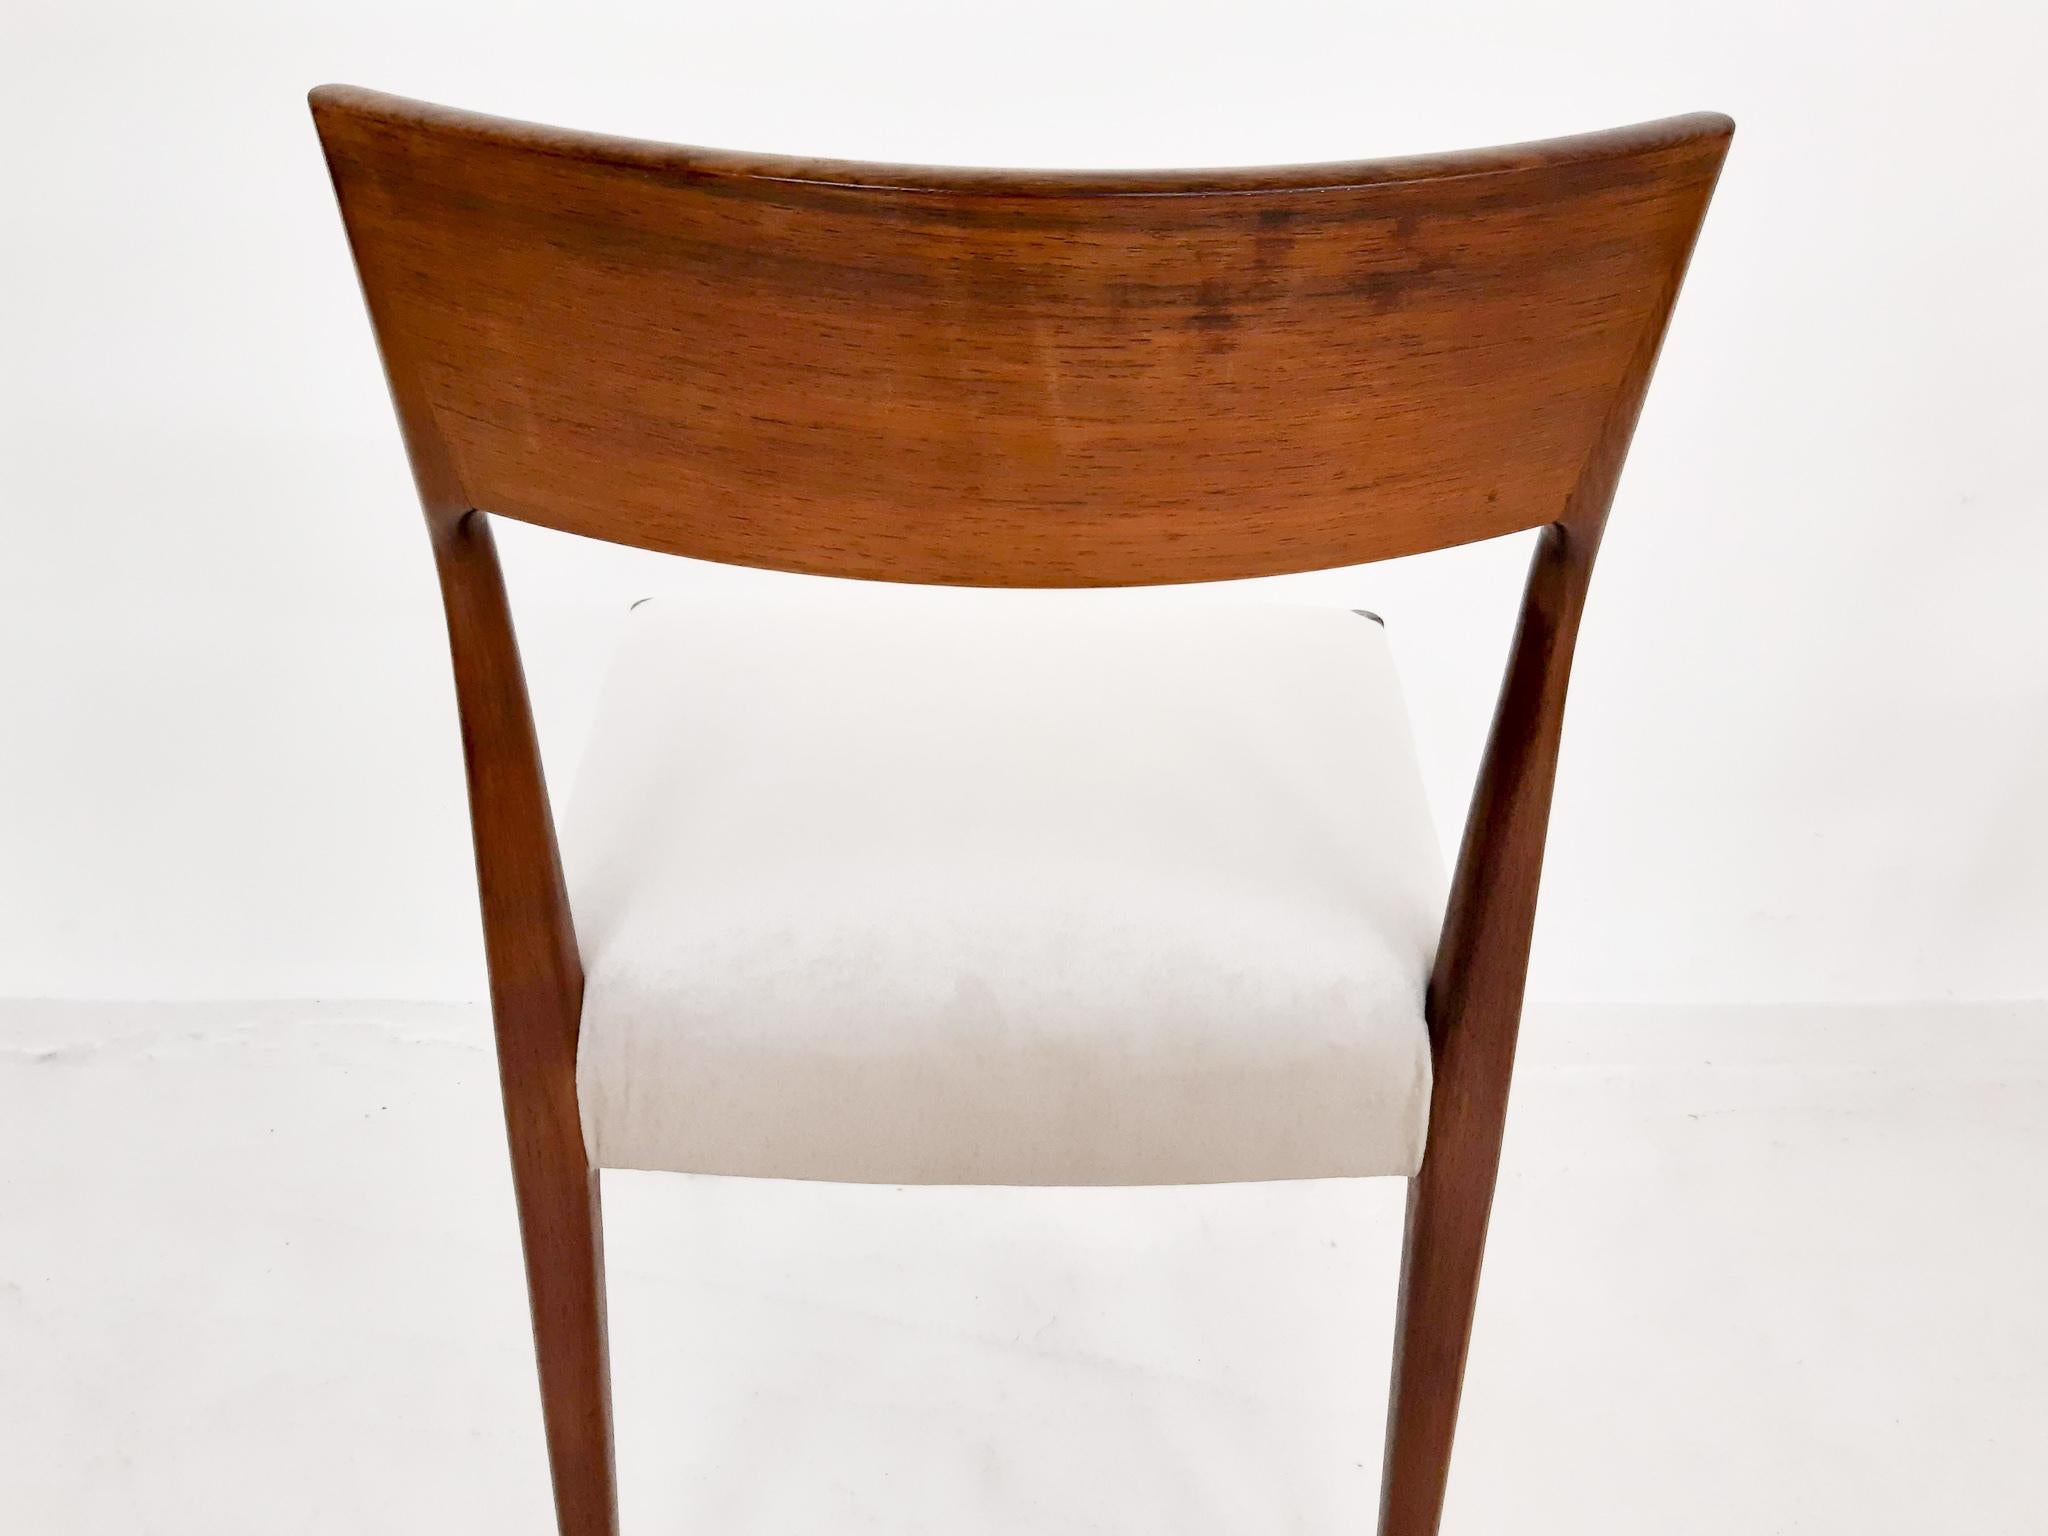 Velvet Set of 4 Rosewood Dining Chairs by Fristho, the Netherlands, 1960s